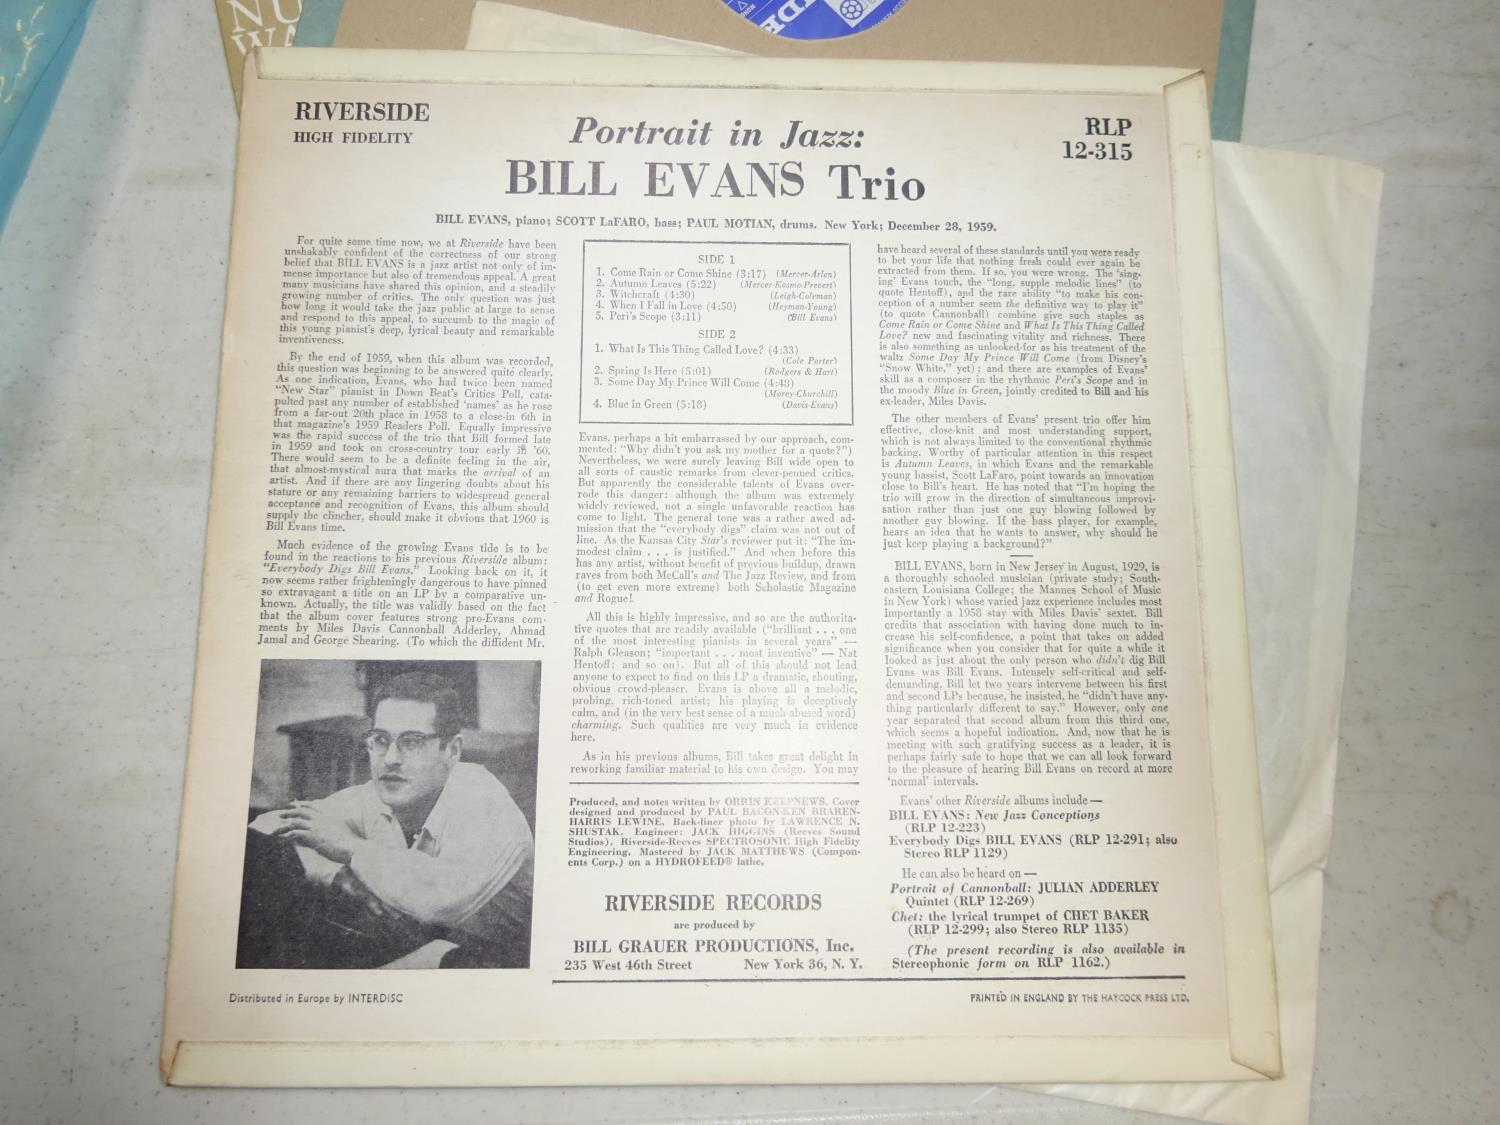 45+ 12" LP records. Including 3x Bill Evans; Dig It!, Portrait in Jazz and Everybody Digs. - Image 6 of 9